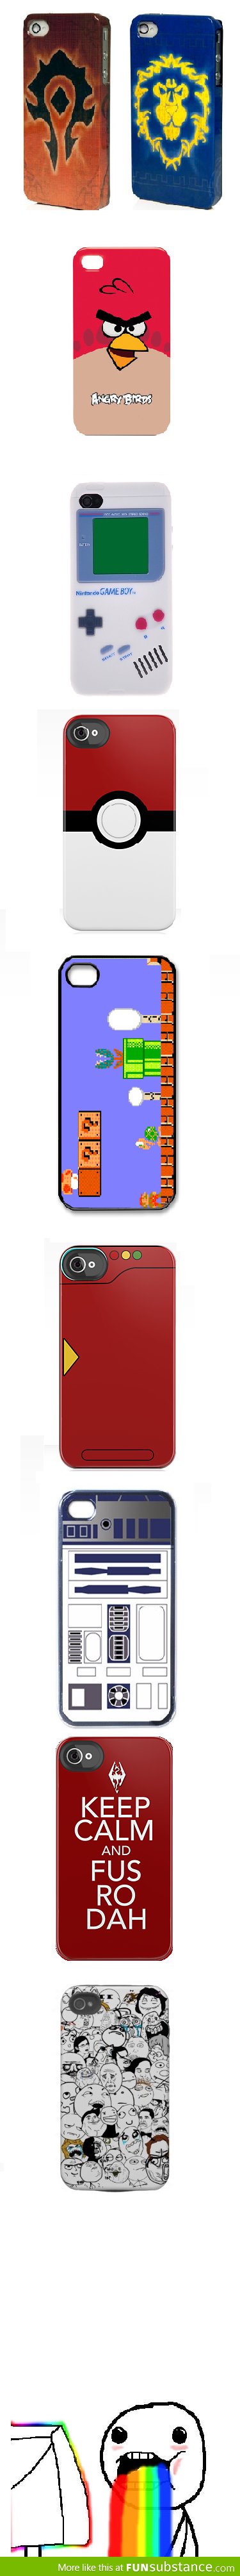 Awesome Iphone Cases